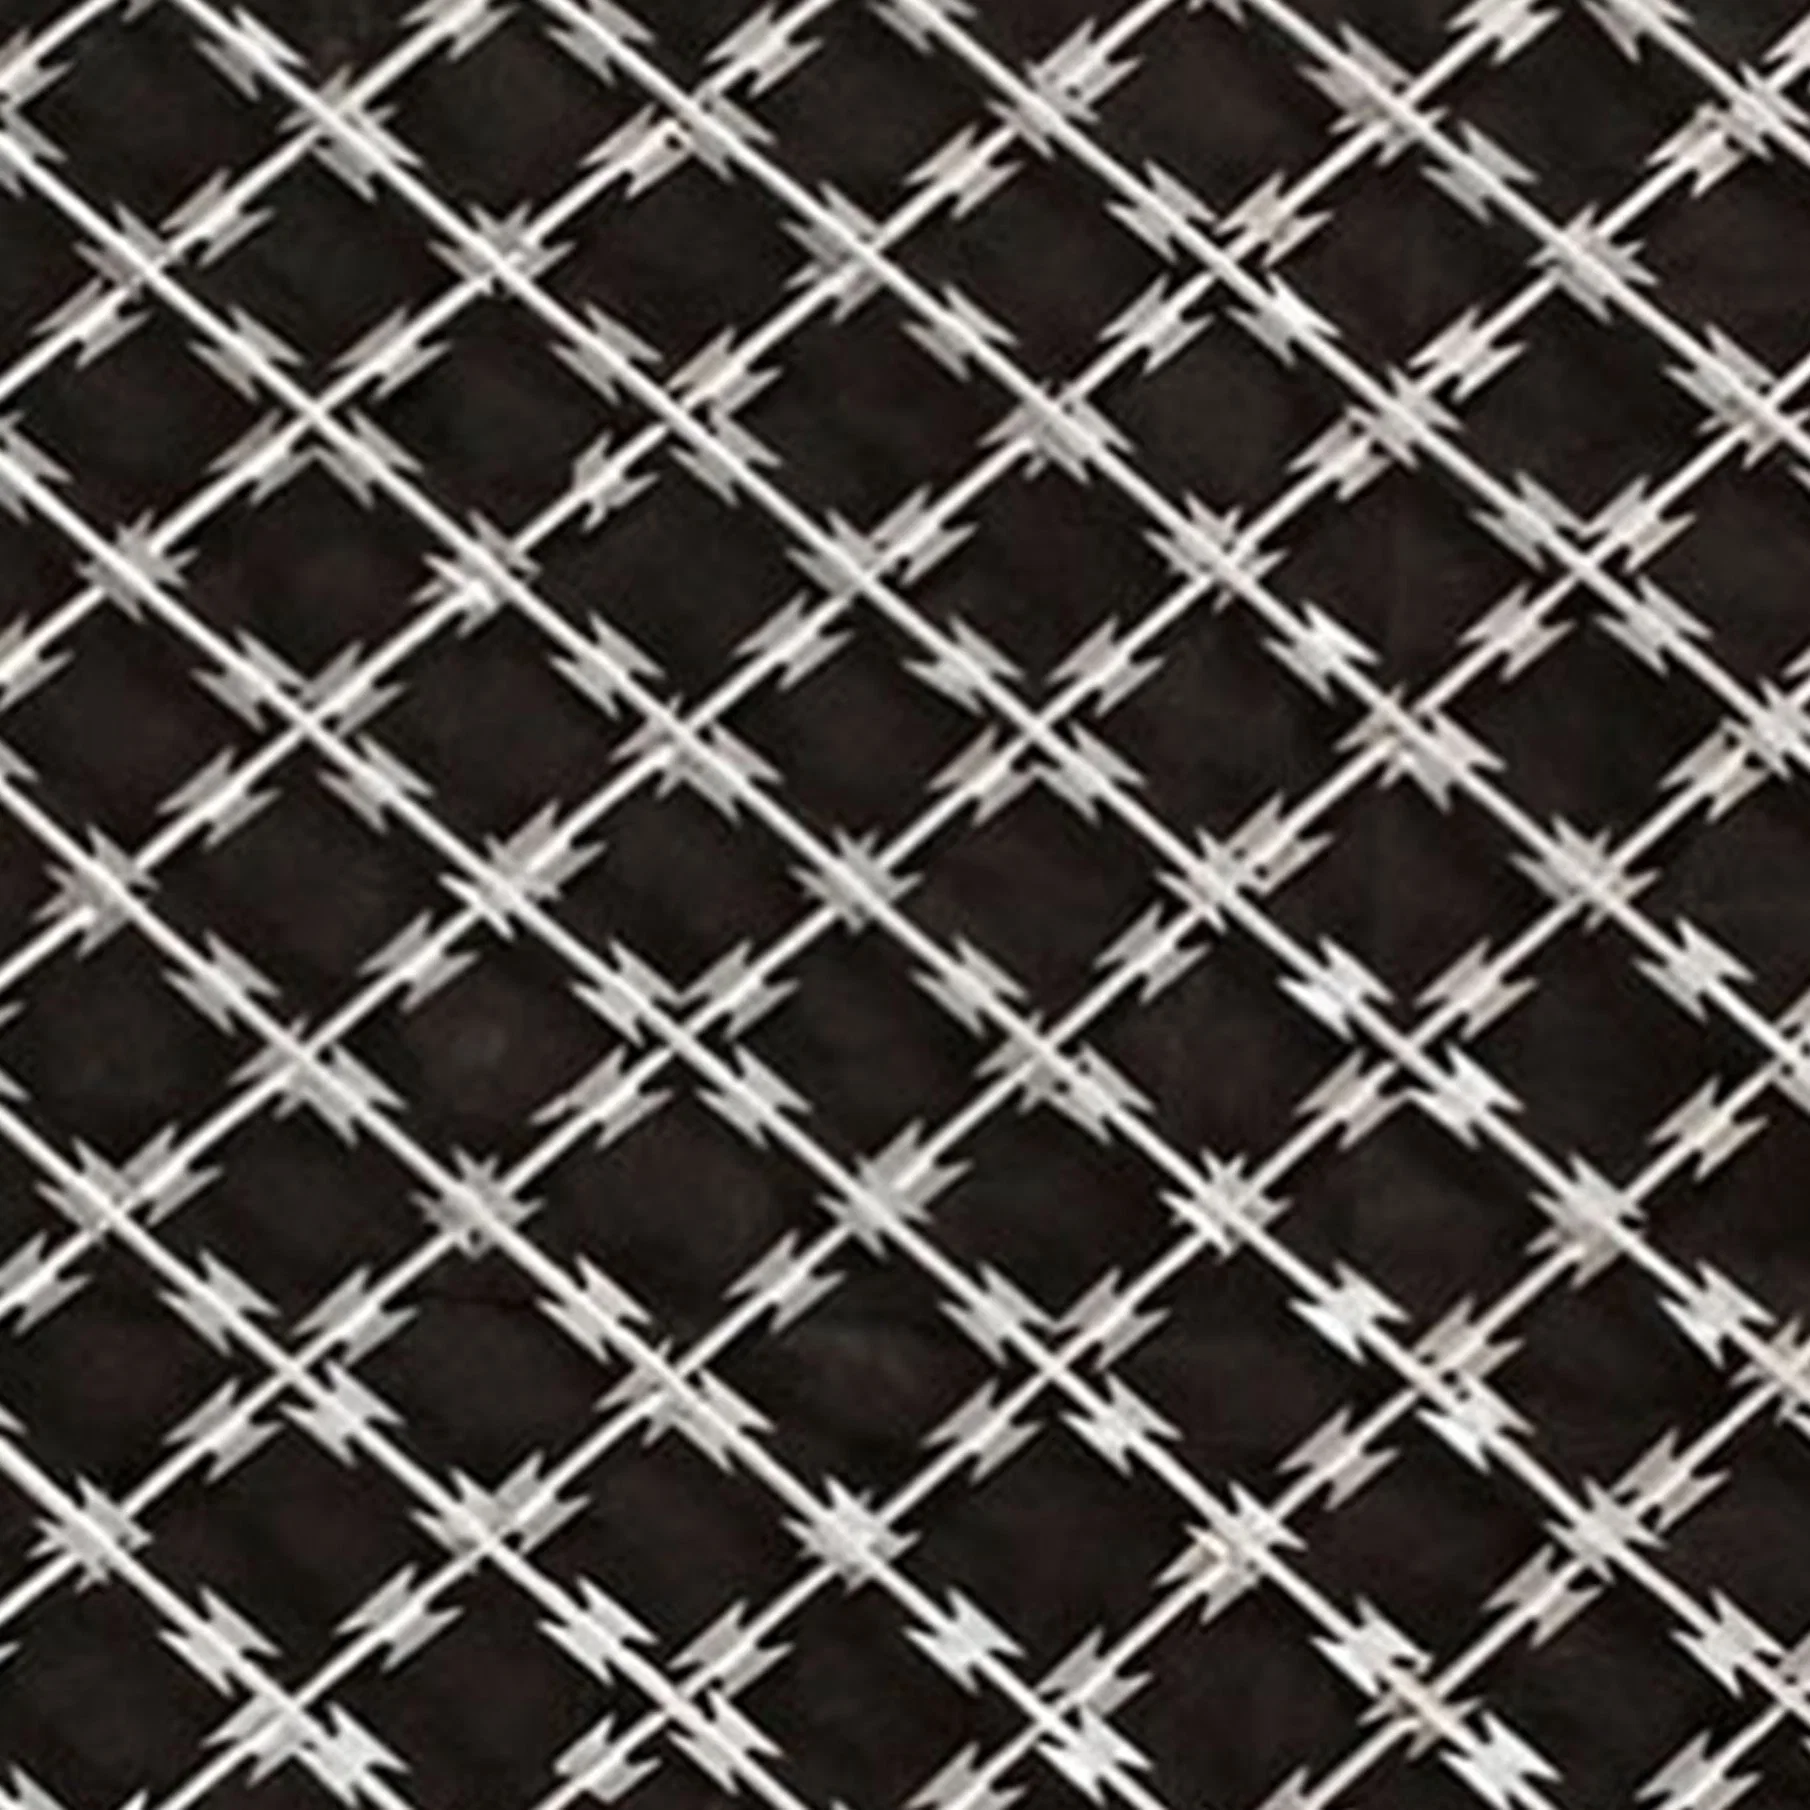 Stainless Steel Hot Dipped Galvanized Concertina Razor Blade Barbed Wire Mesh Fence